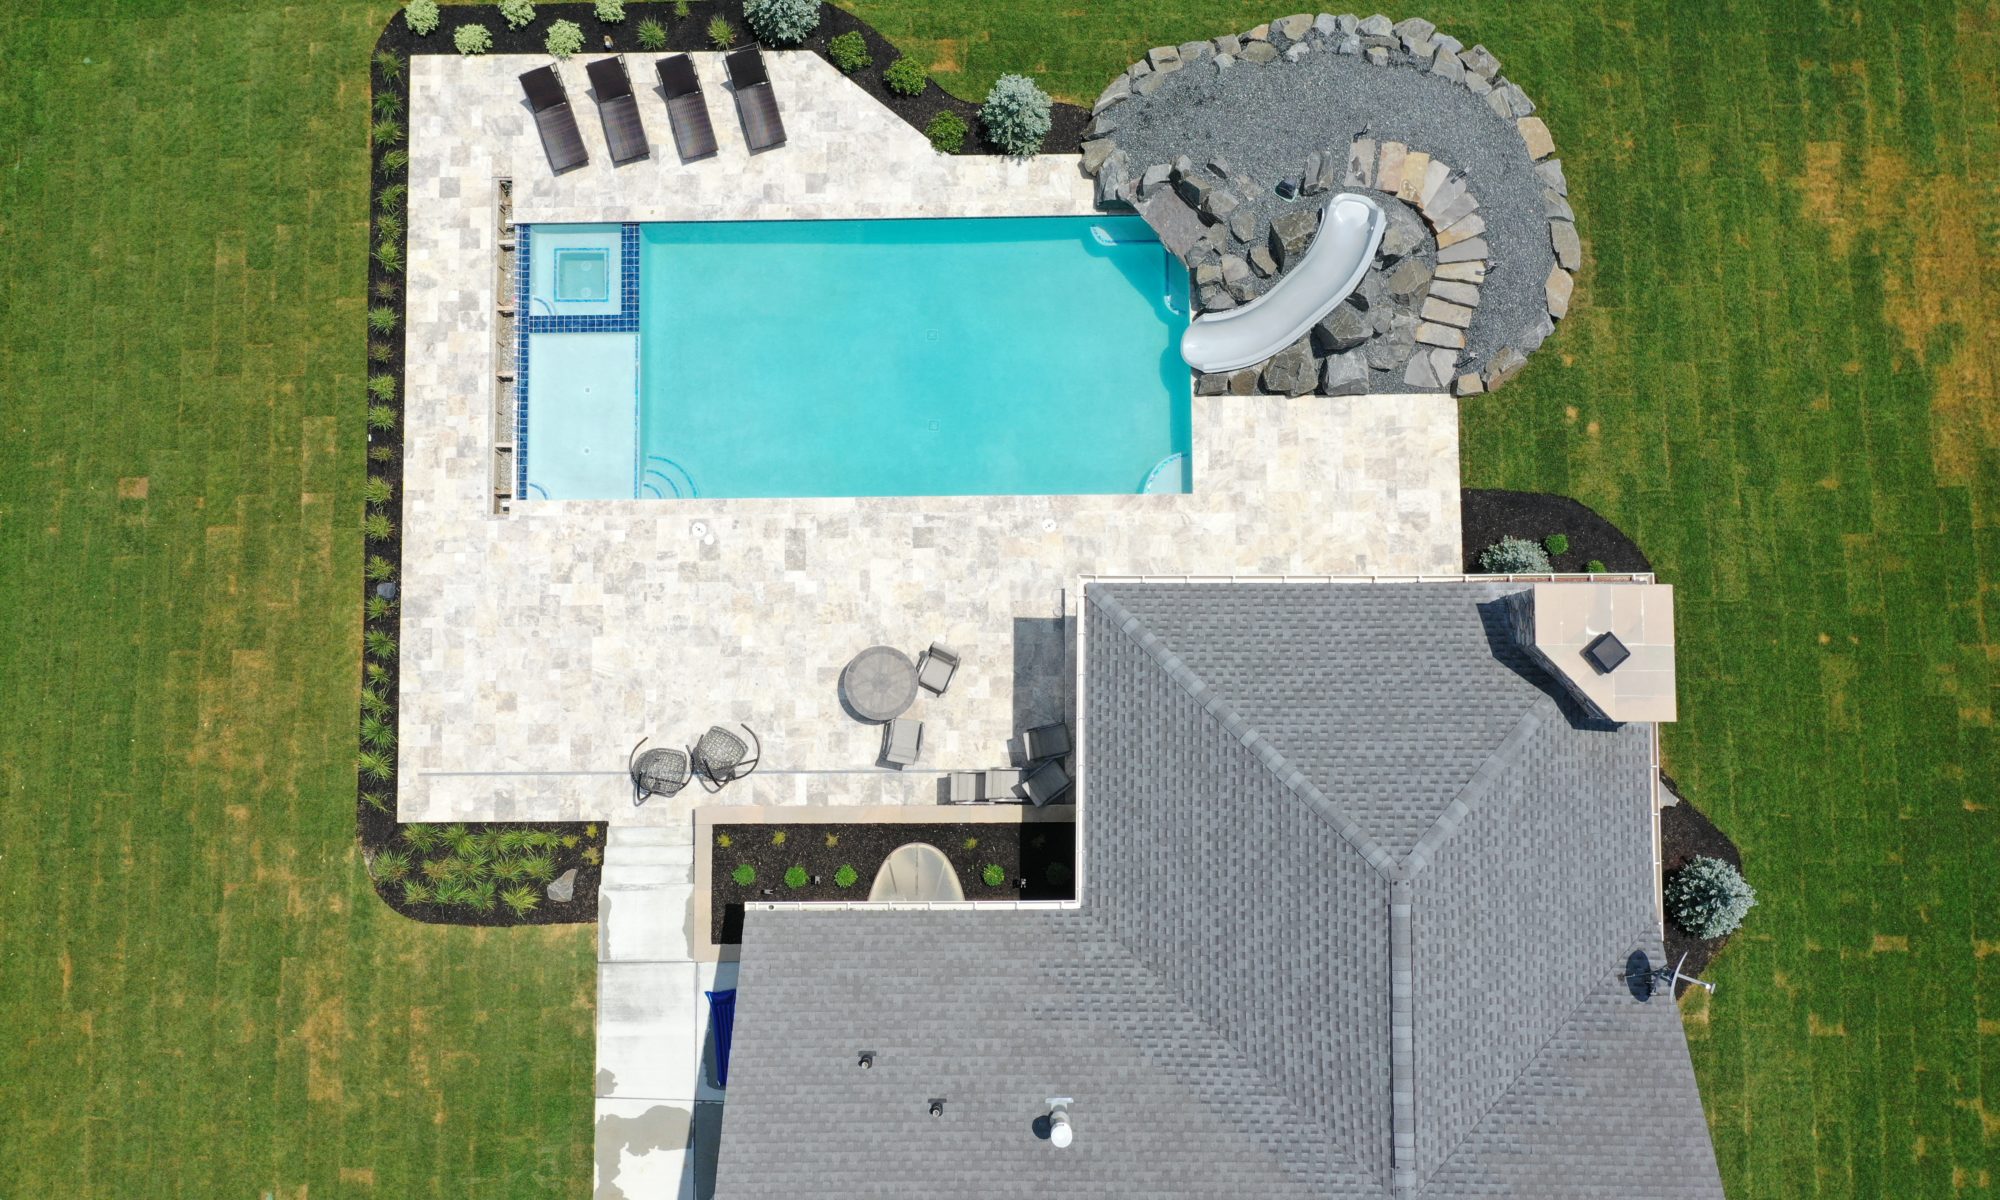 poolside pavilion paver patio pool fire fireplace stairs cover gray grey tanning deck graven plants trees flowers black